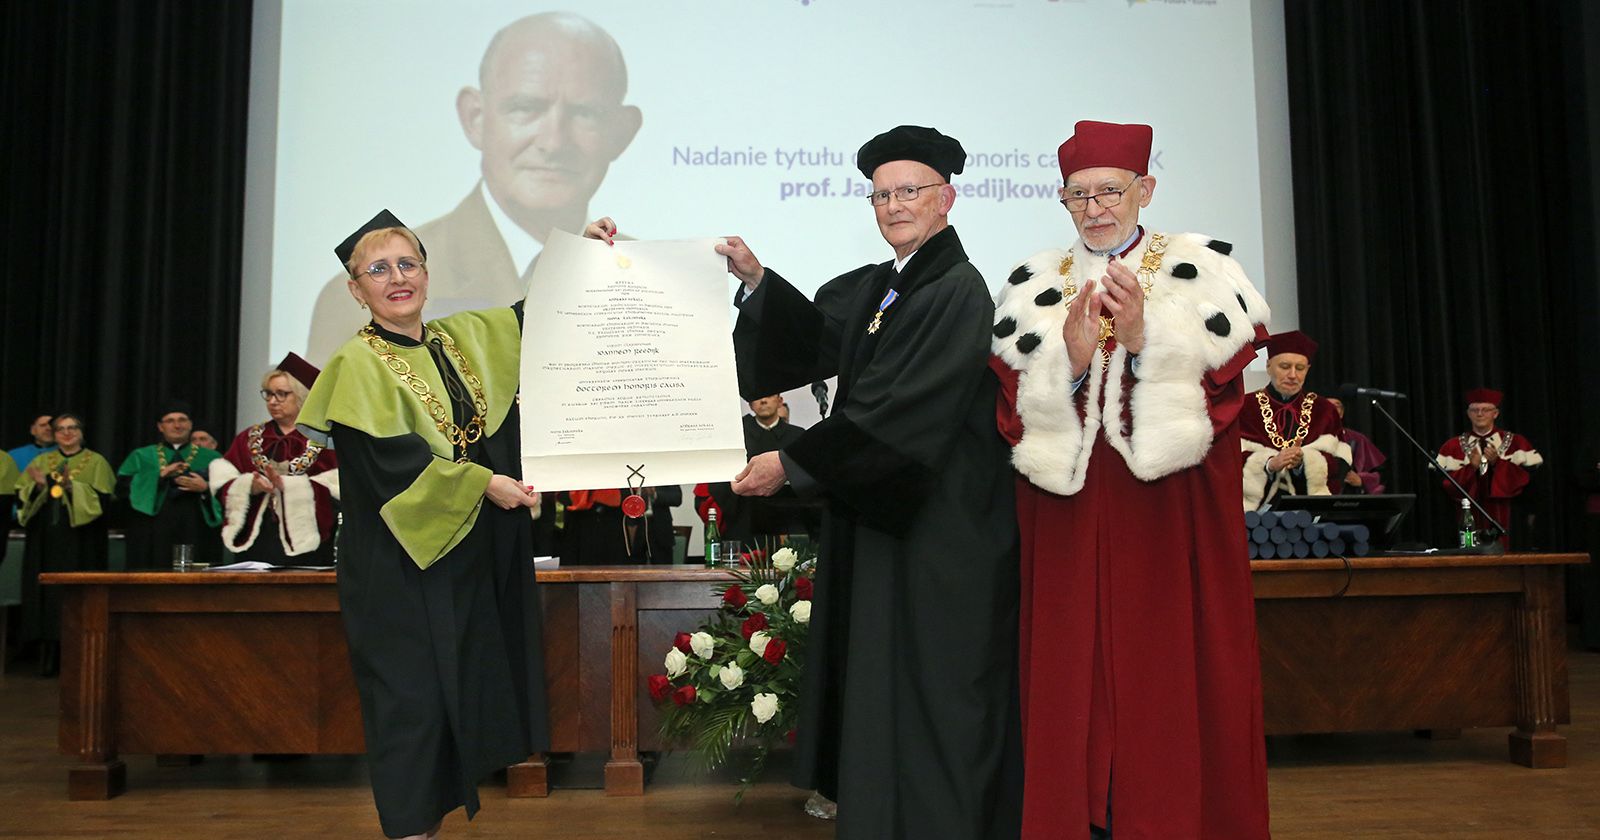 The Nicolaus Copernicus University Senate decided to grant Prof. Reedijk the honorary title (by Resolution No. 64 of December 20th 2022) based on the scientist's outstanding research achievements 